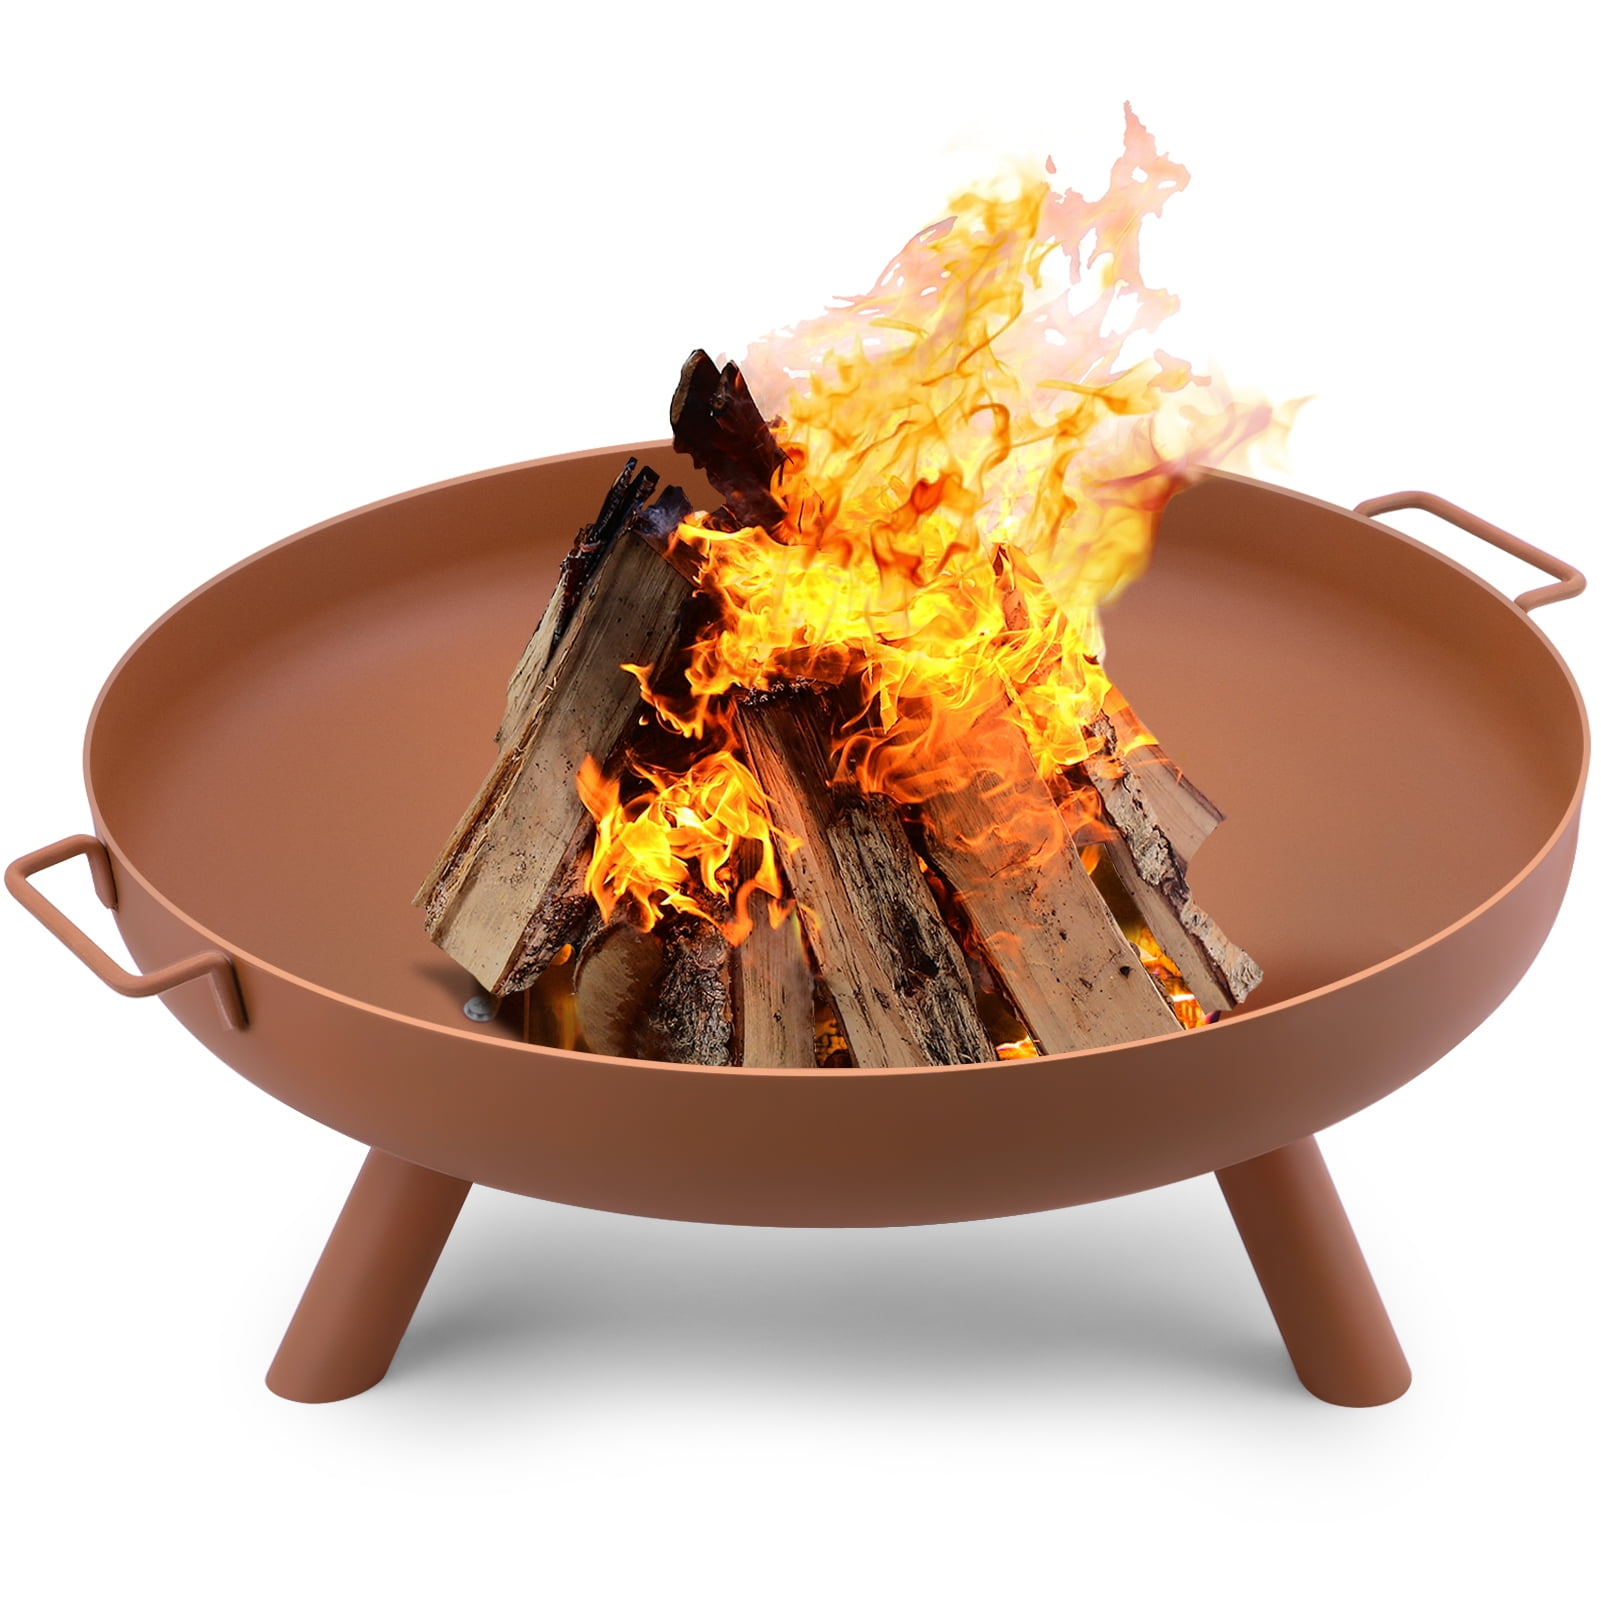 Fire Pit Outdoor Wood Burning Bowl, Wood Burning Fire Pits For Decks